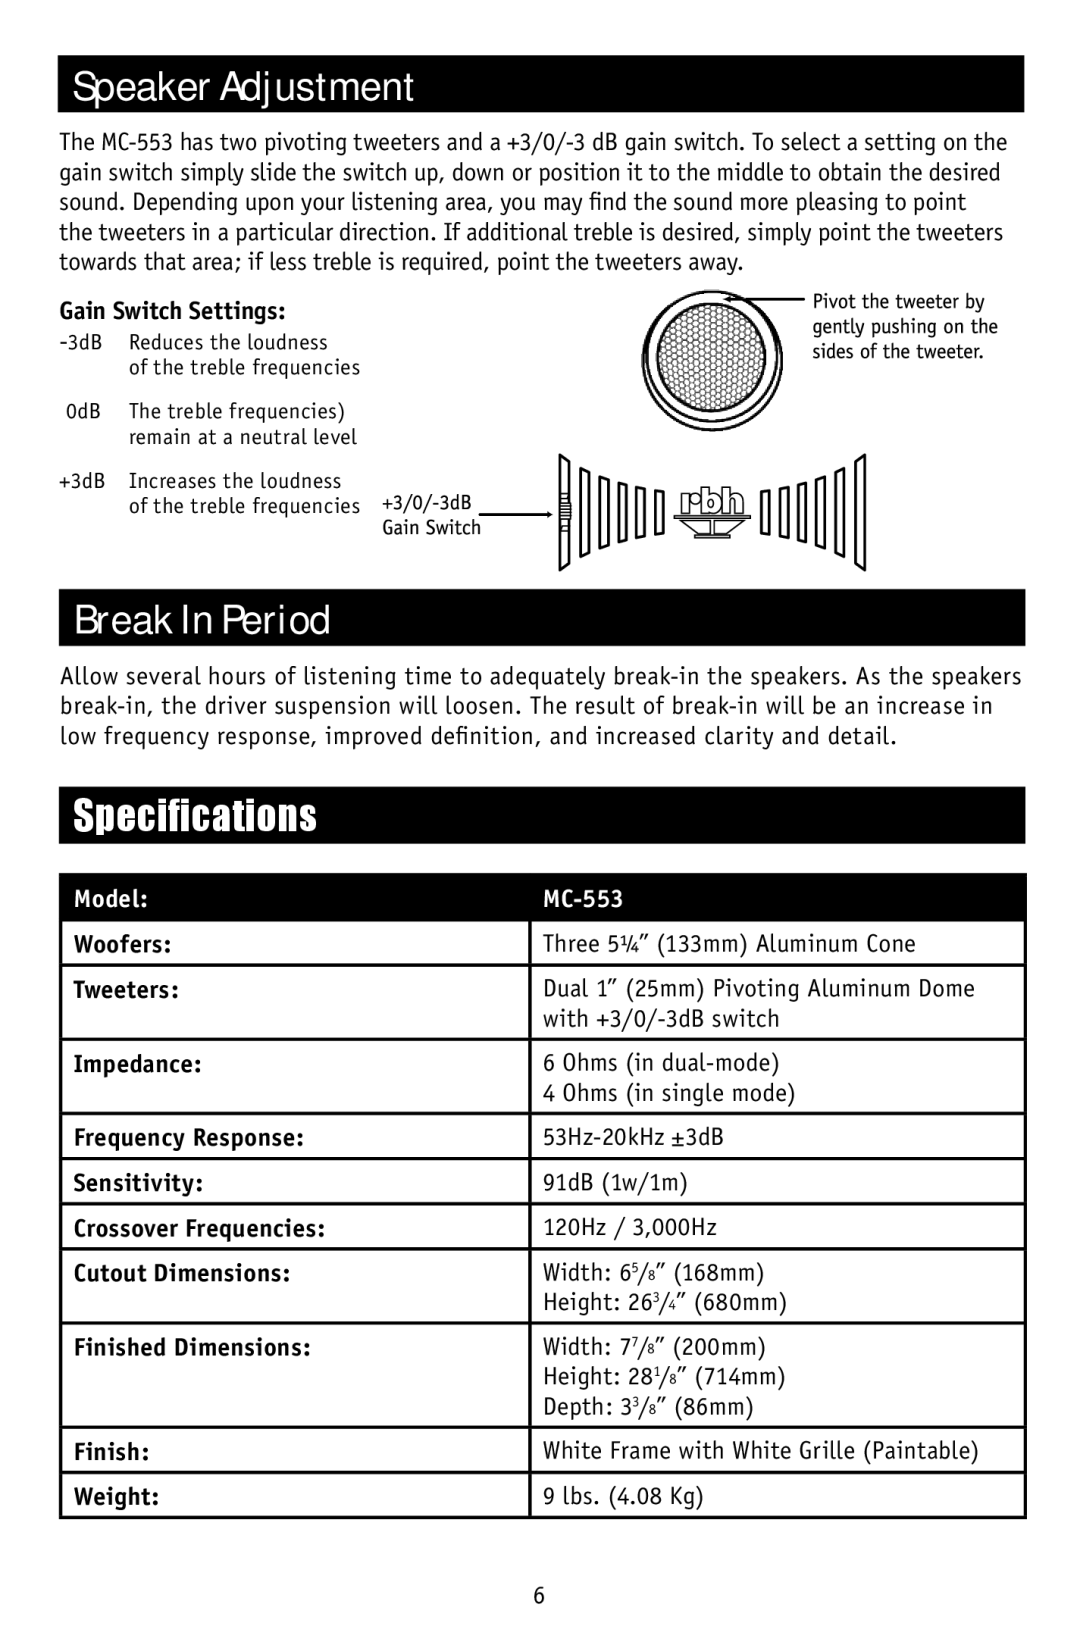 RBH Sound MC-553LCR owner manual Speaker Adjustment, Break In Period, Specifications, Model 